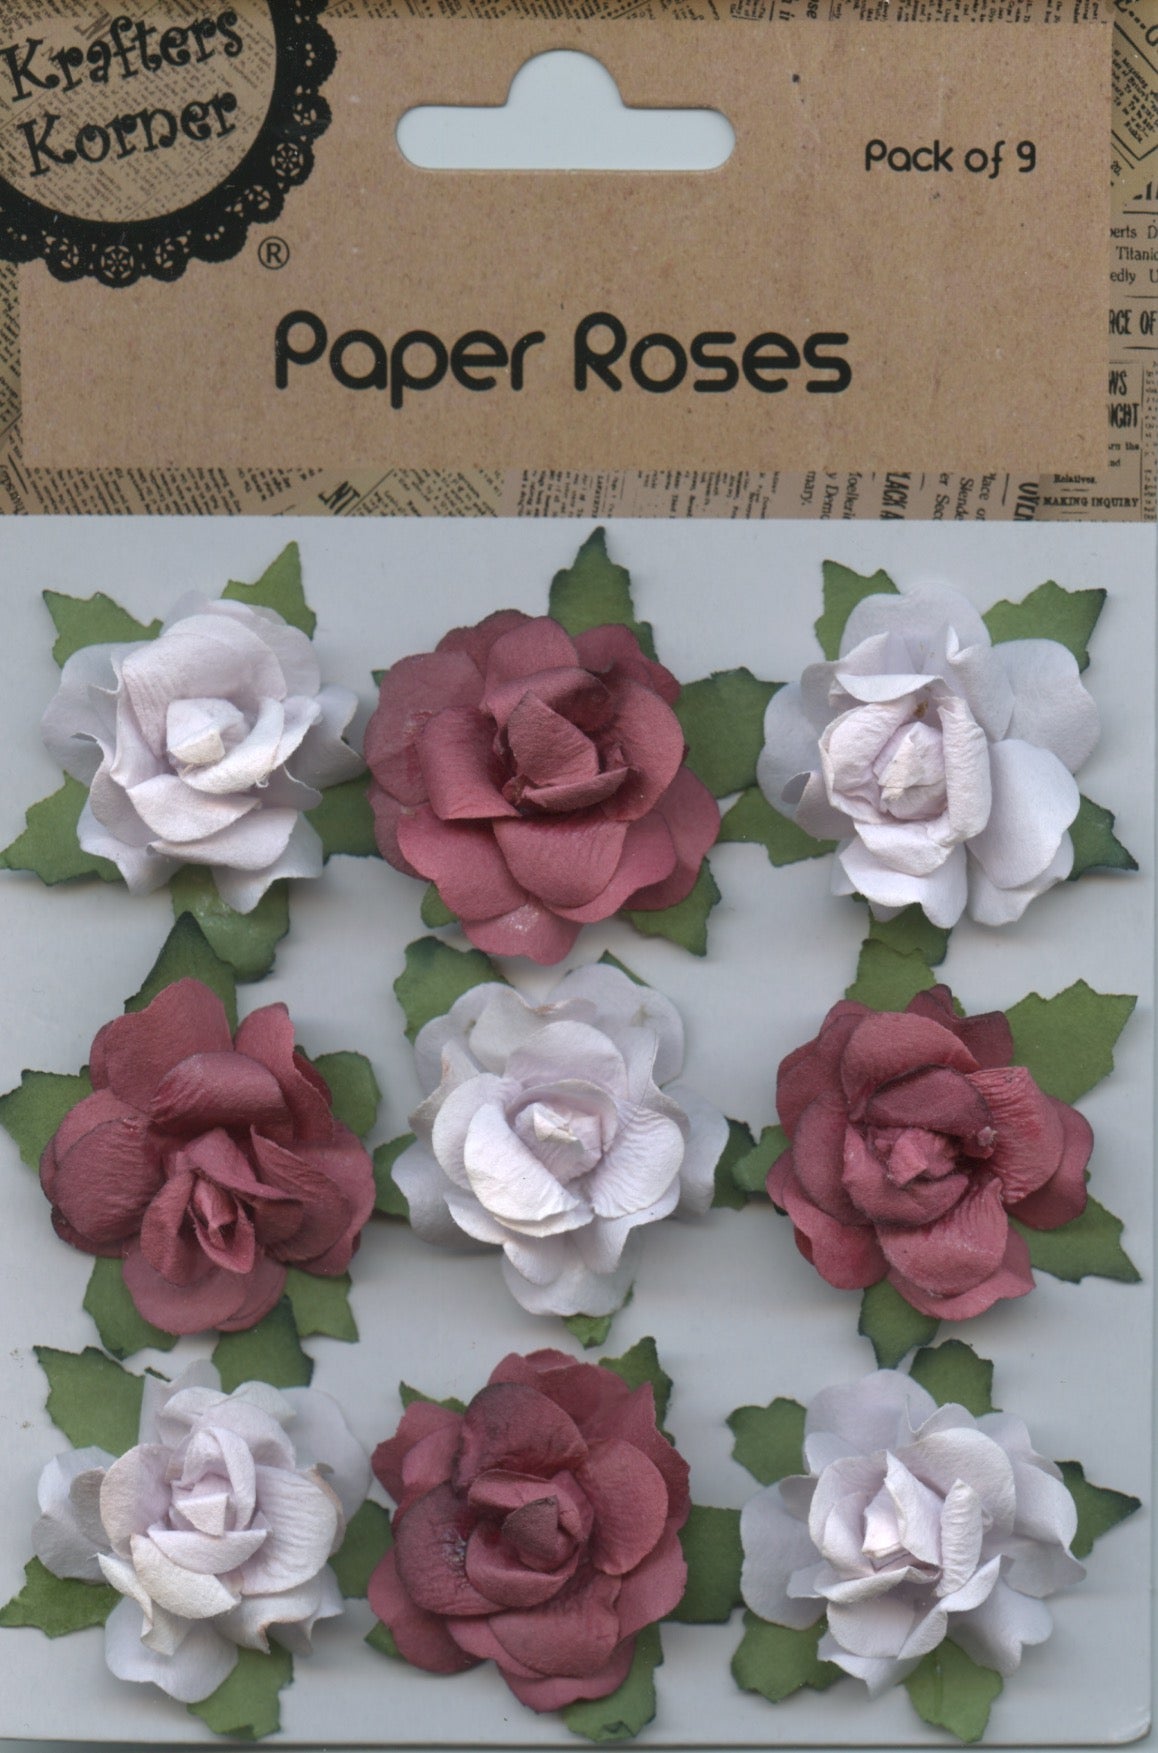 Paper Roses - White and Dusty Rose - Pack of 9 - 30mm Diameter